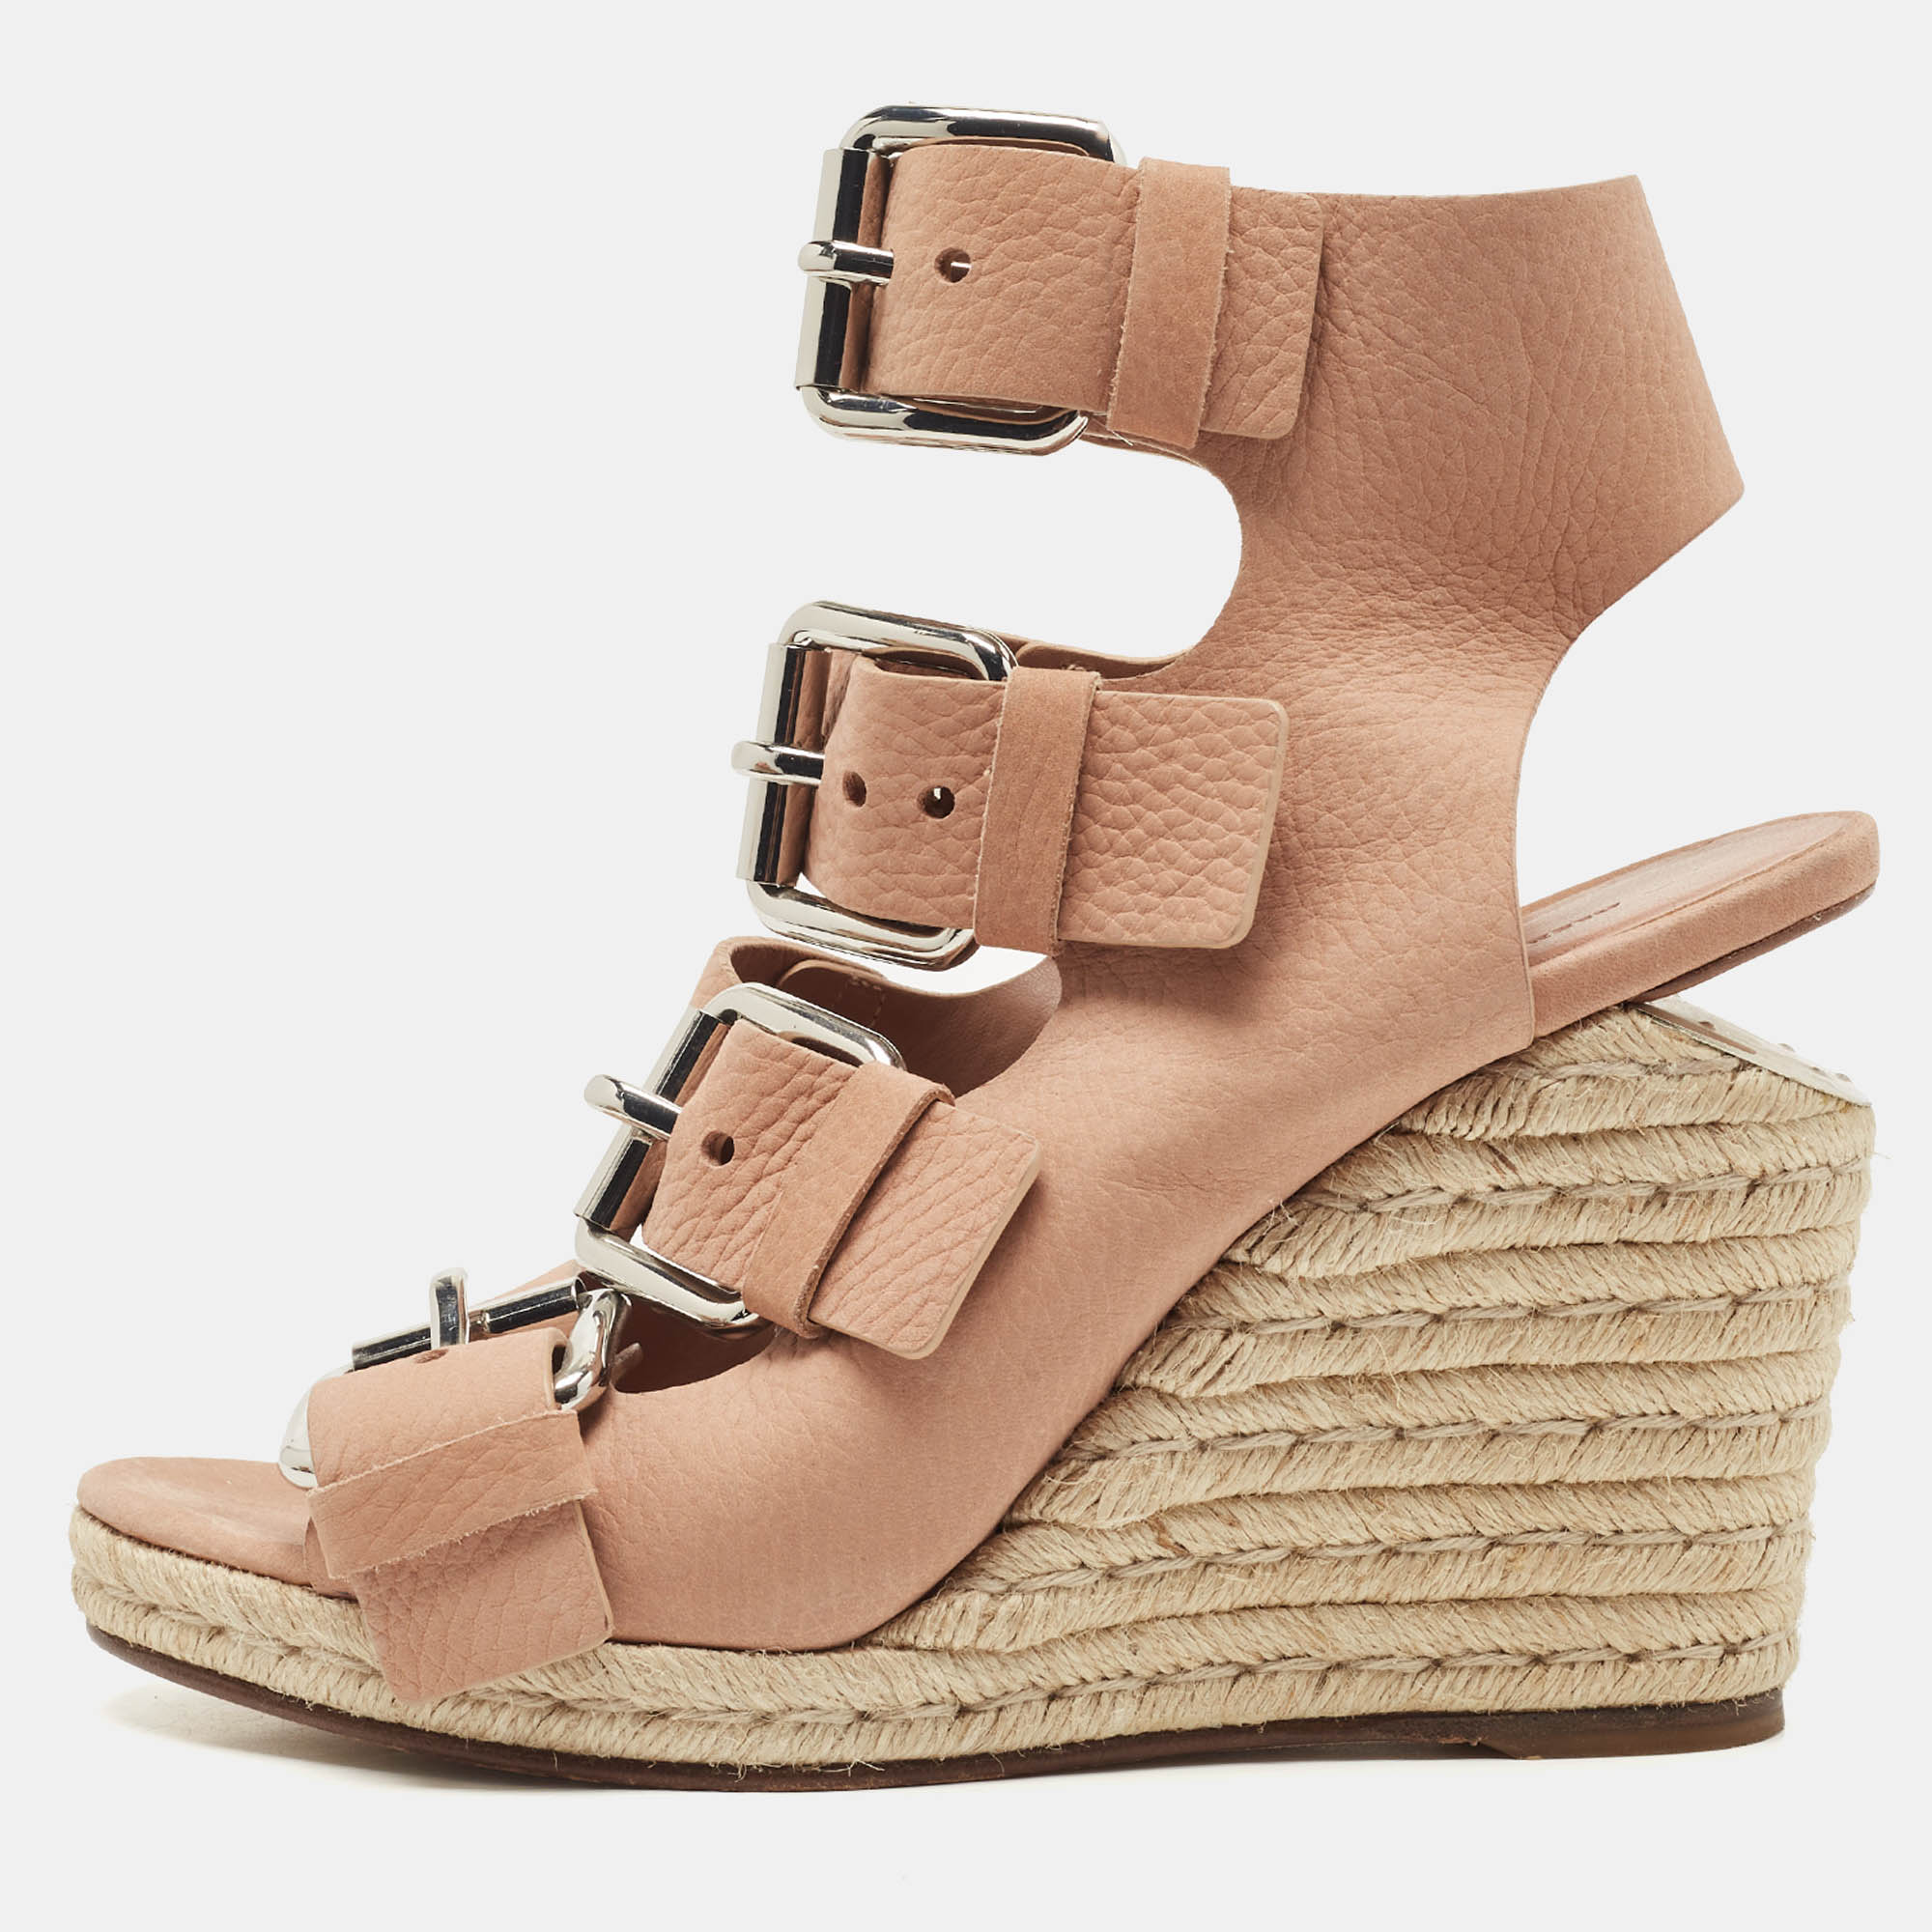 Alexander Wang Pink Leather Jo Buckle Espadrille Wedge Sandals Size 39